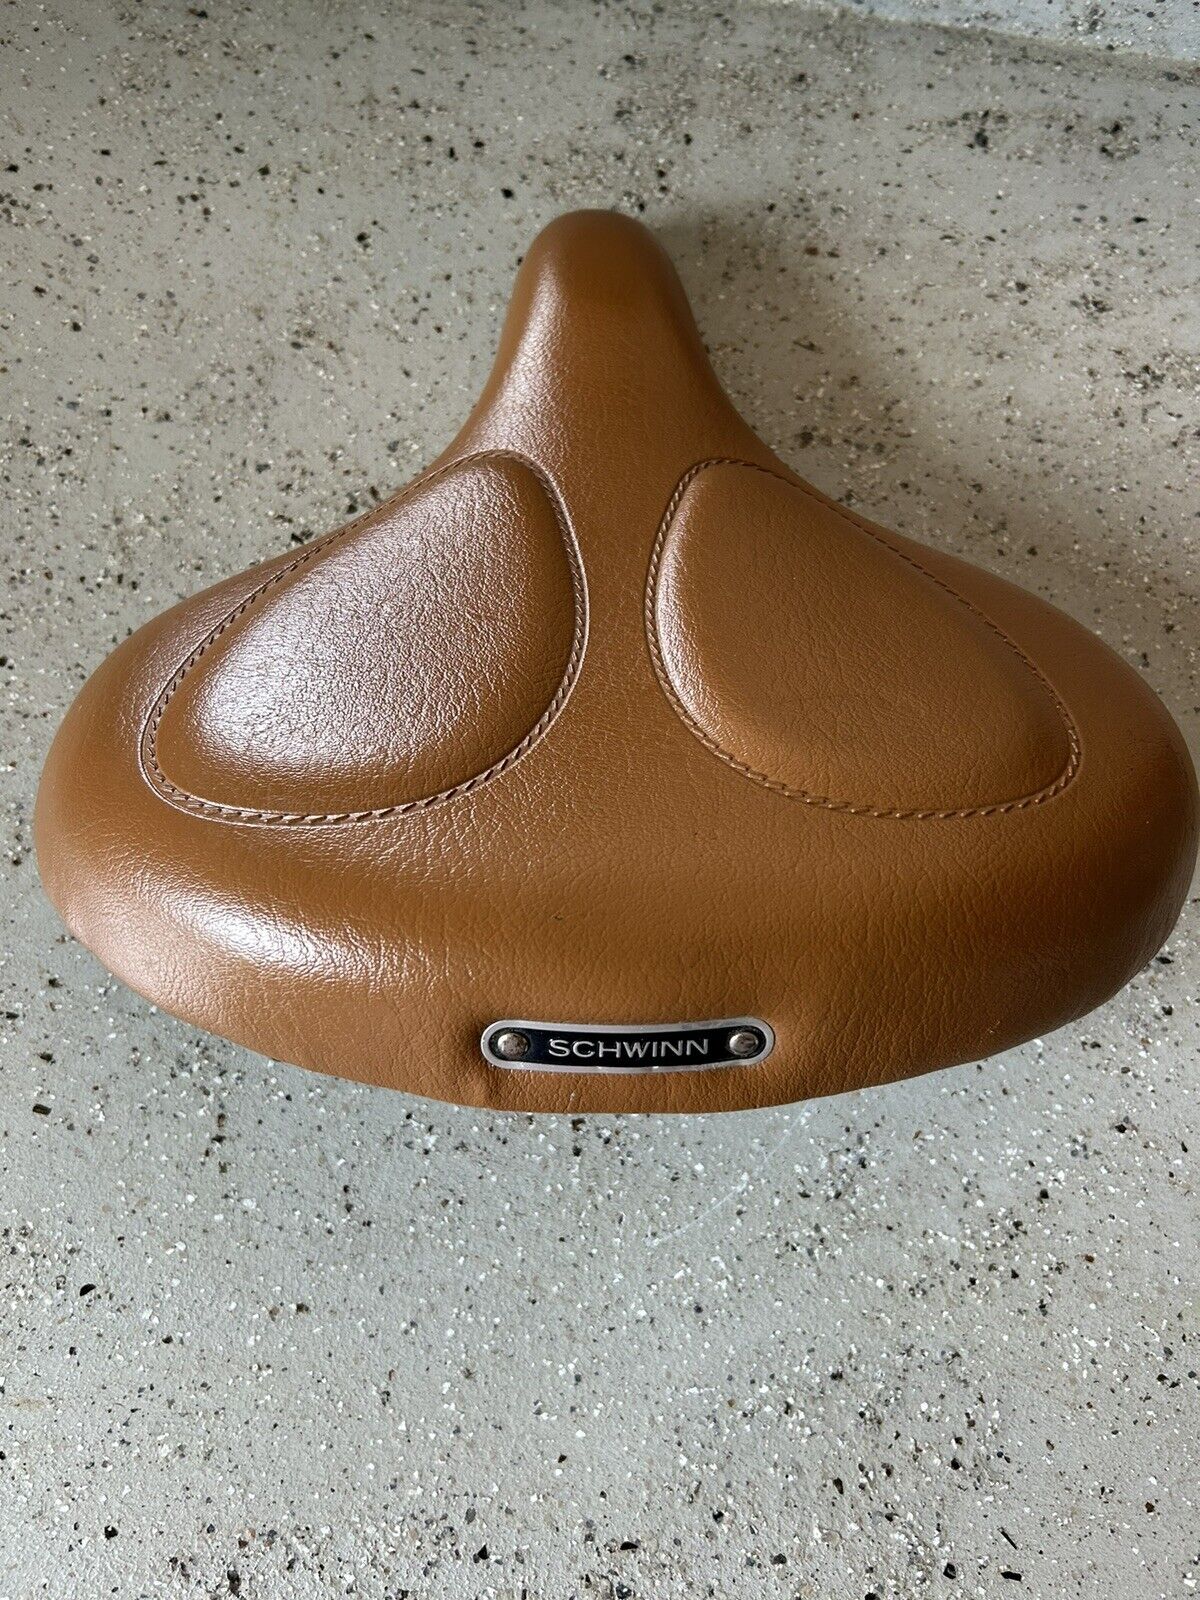 1970s SCHWINN 7148 BICYCLE SEAT SADDLE  BROWN WITH SPRINGS-13x12”-GREAT SHAPE